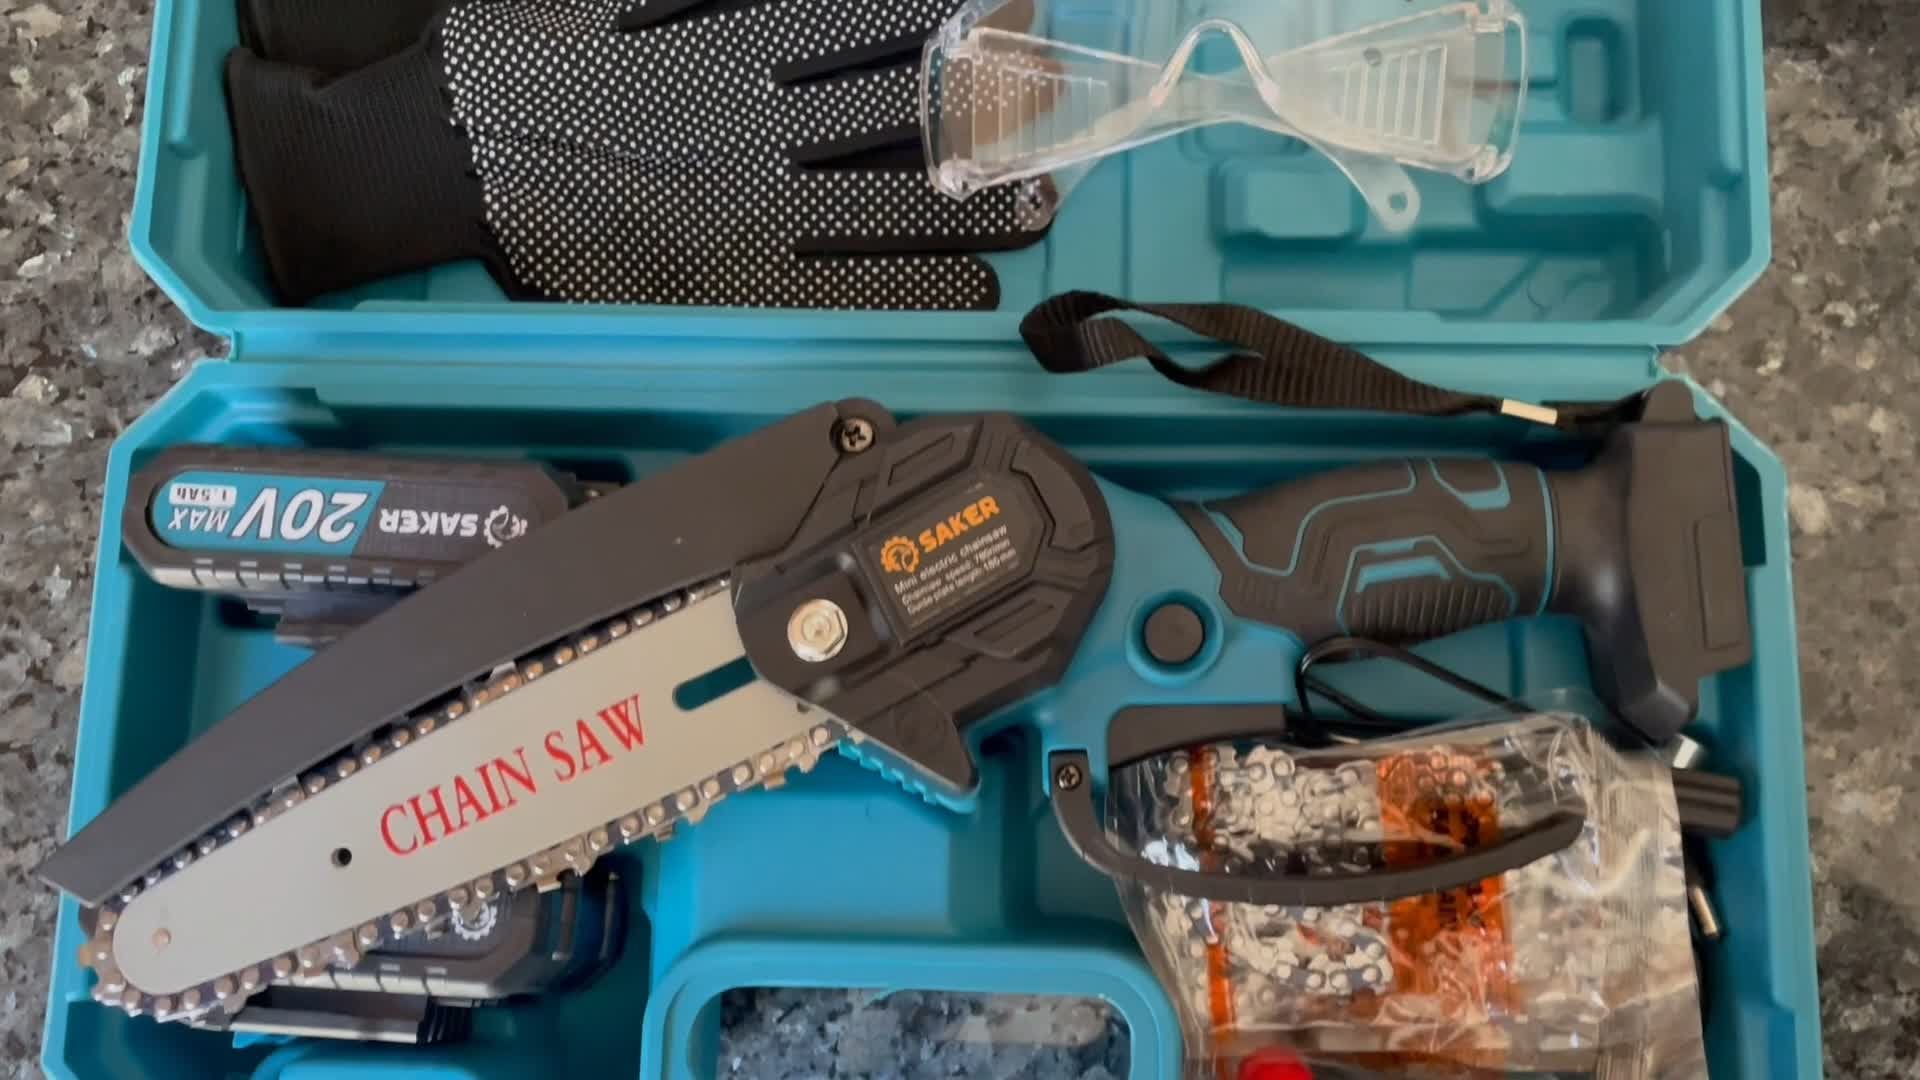 Saker Mini Chainsaw REVIEW - Our HONEST Opinions!